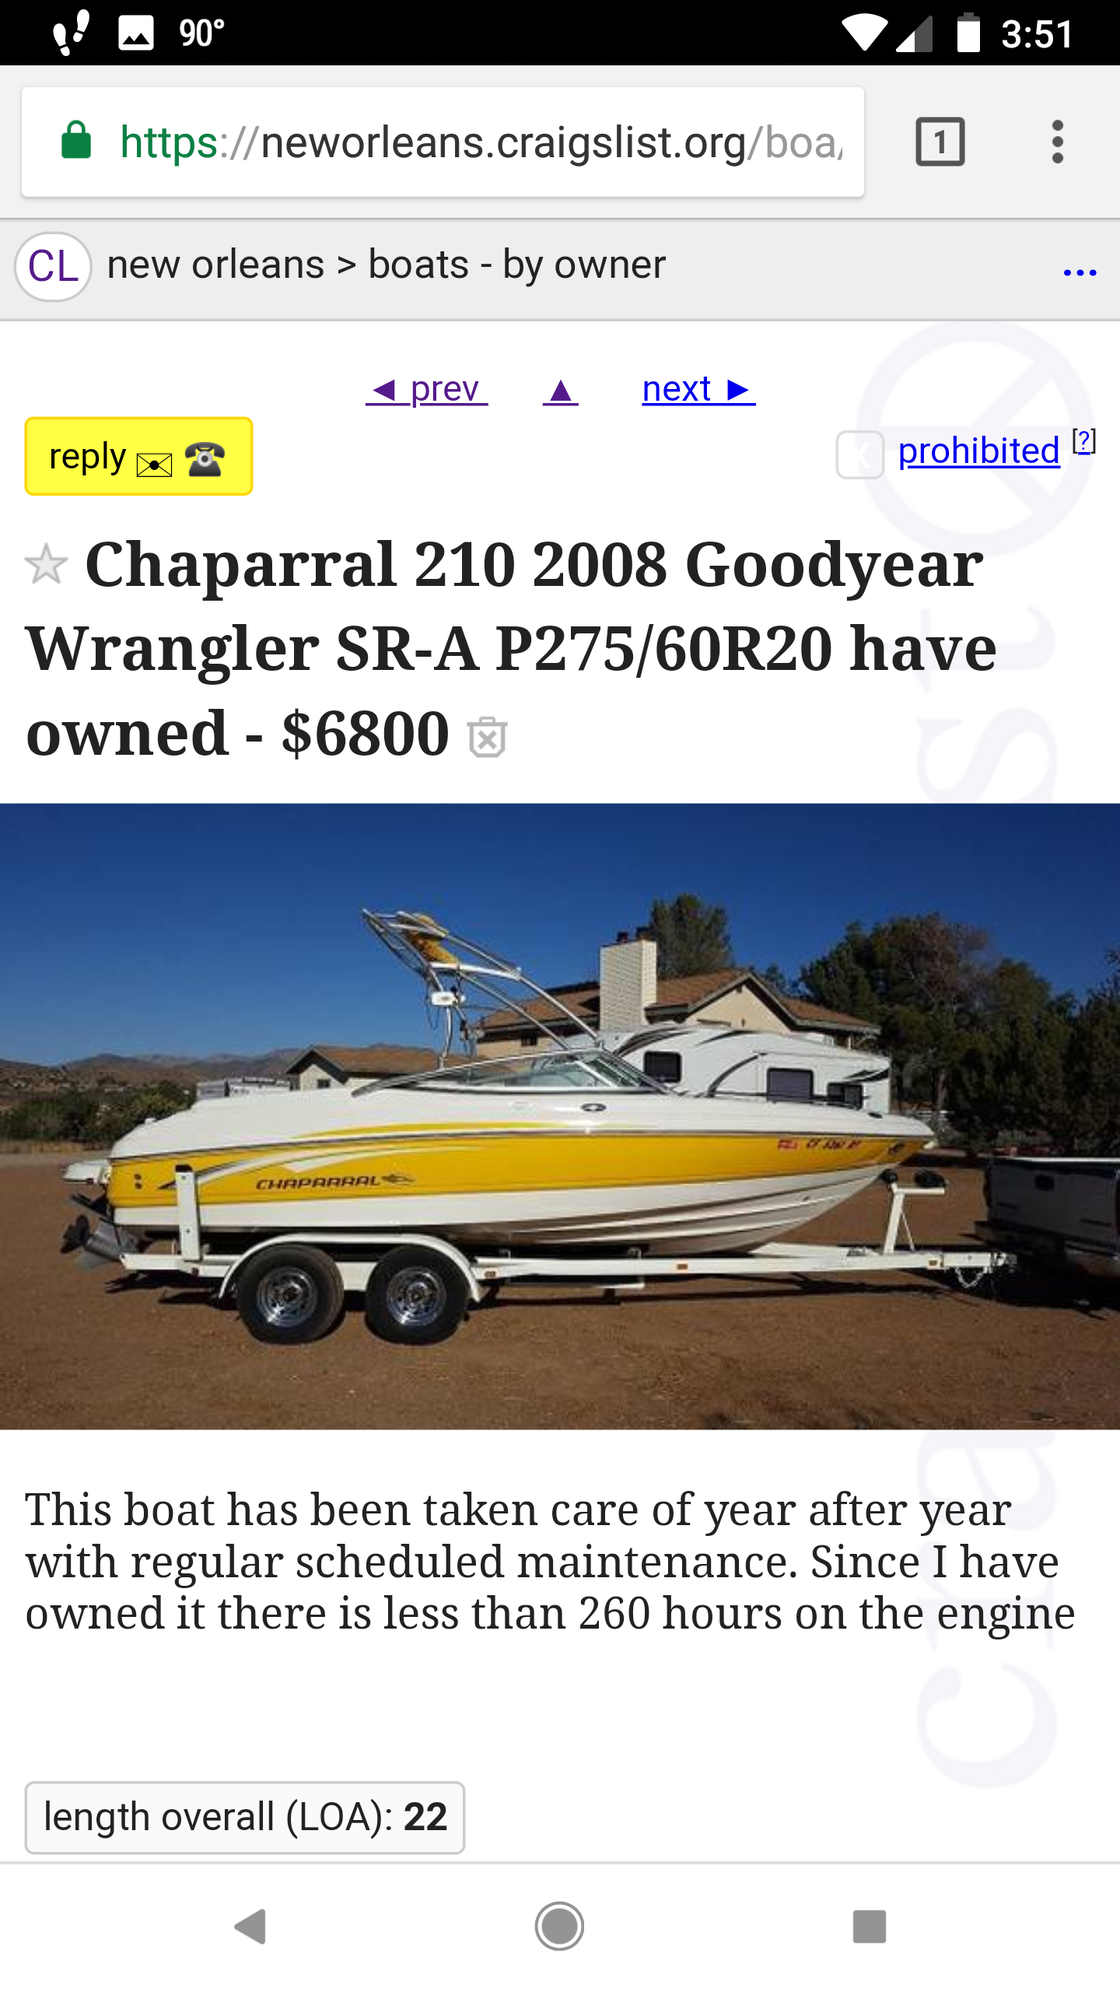 Craigslist scams - The Hull Truth - Boating and Fishing Forum